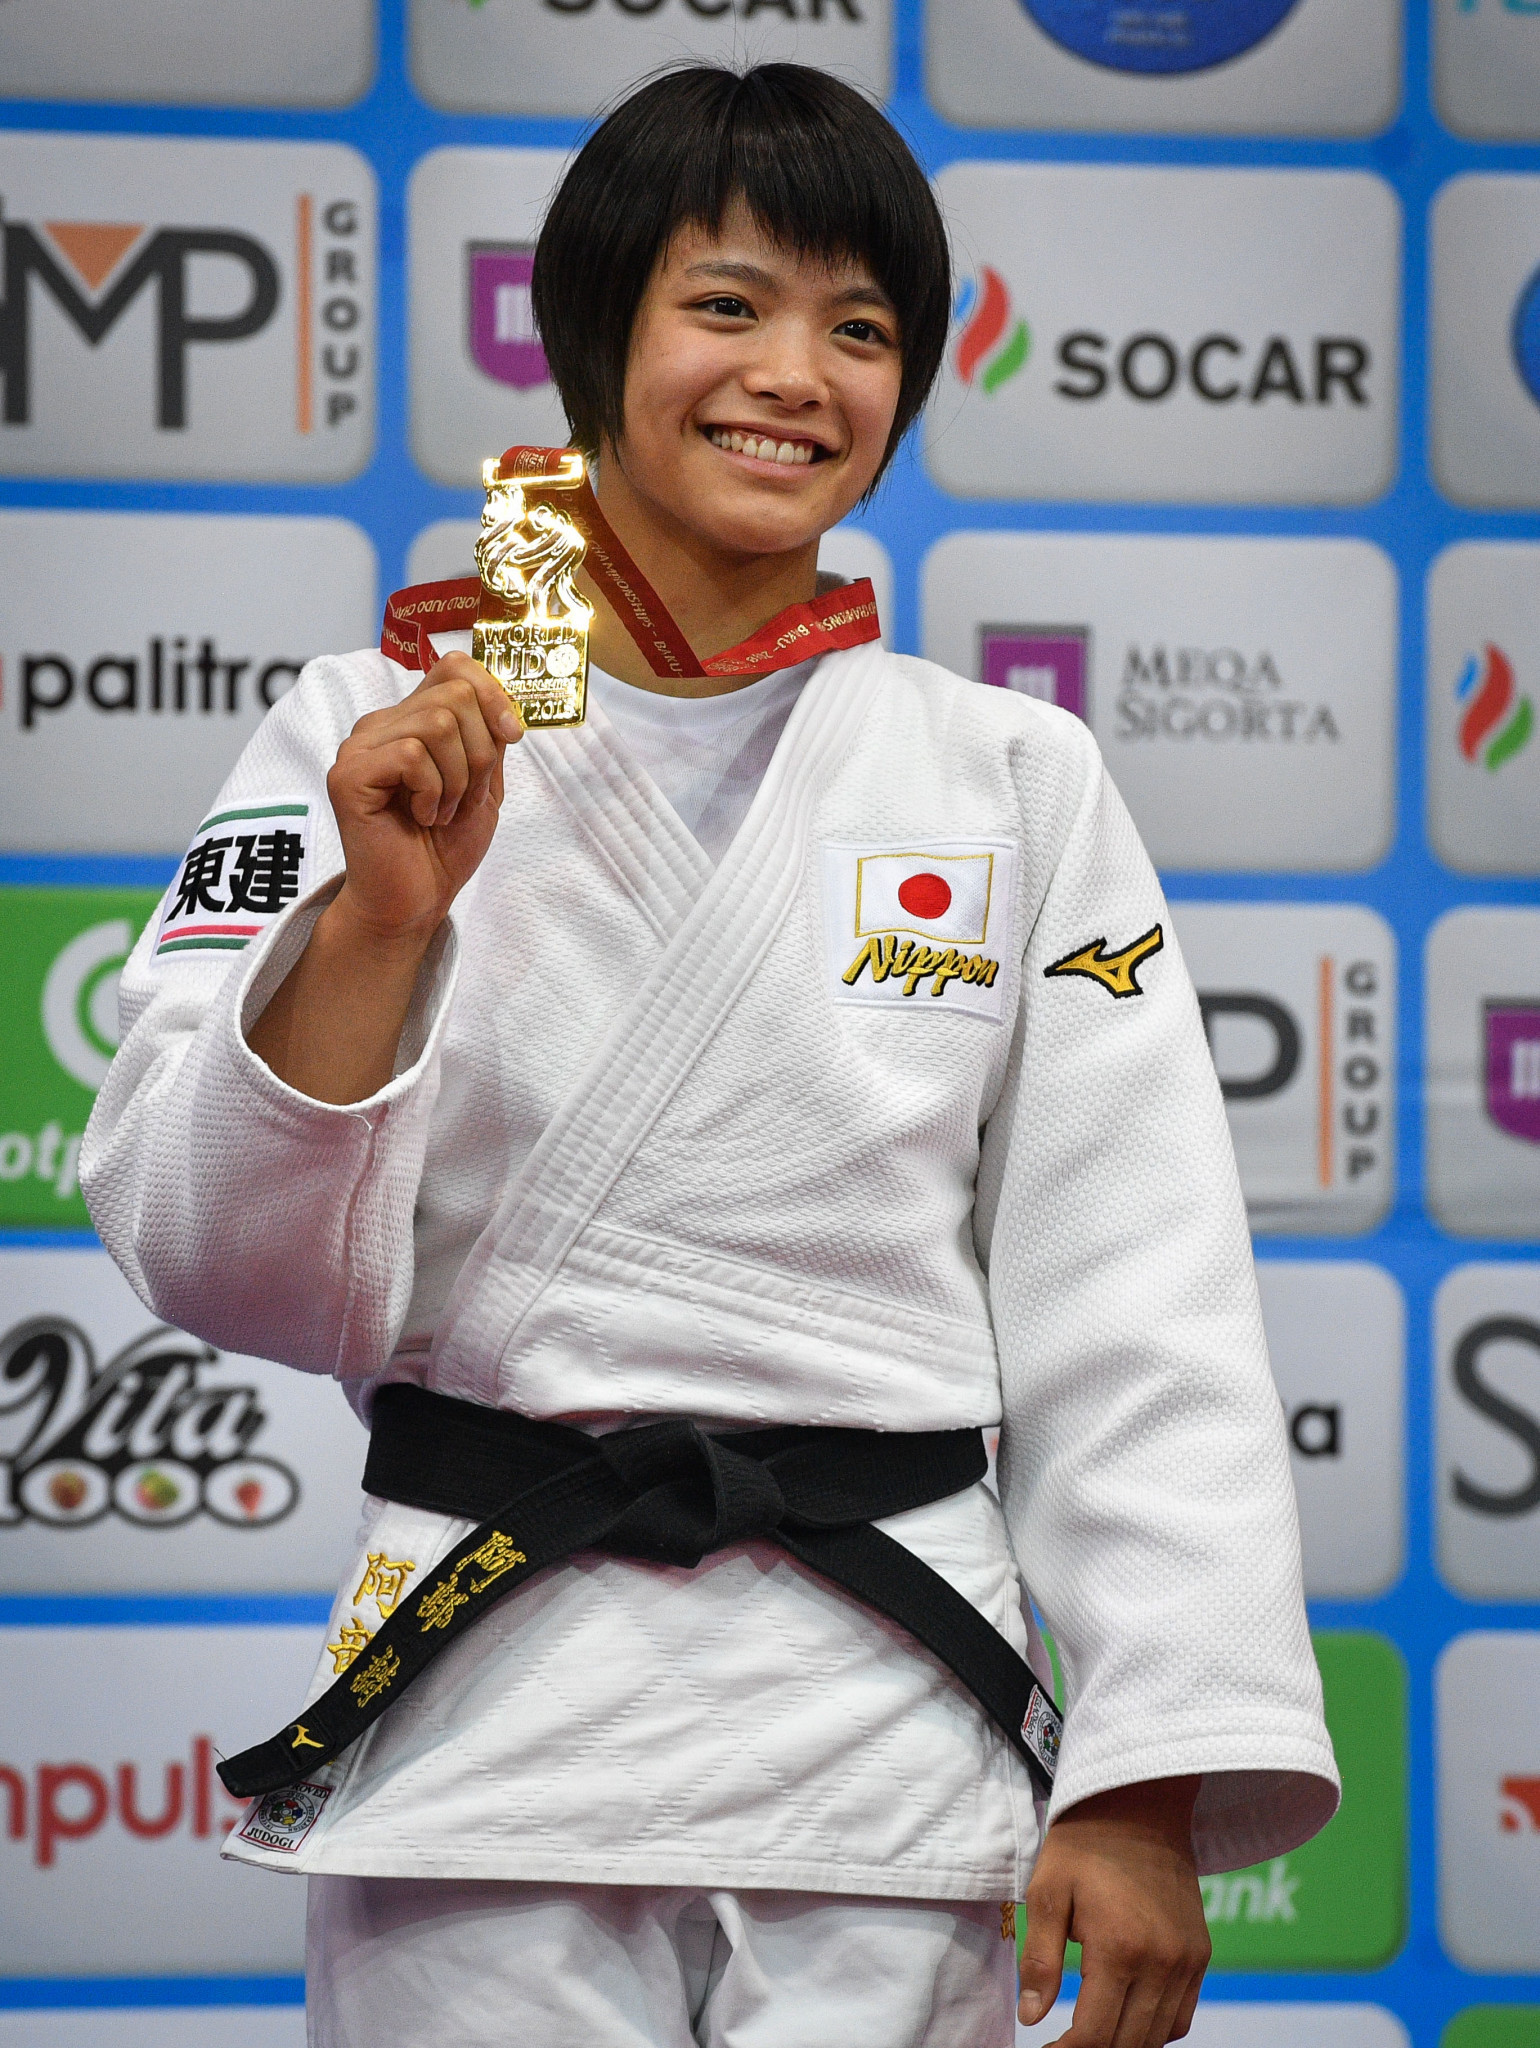 Uta Abe takes gold in the women's under-52kg category at her first World Championships ©Getty Images